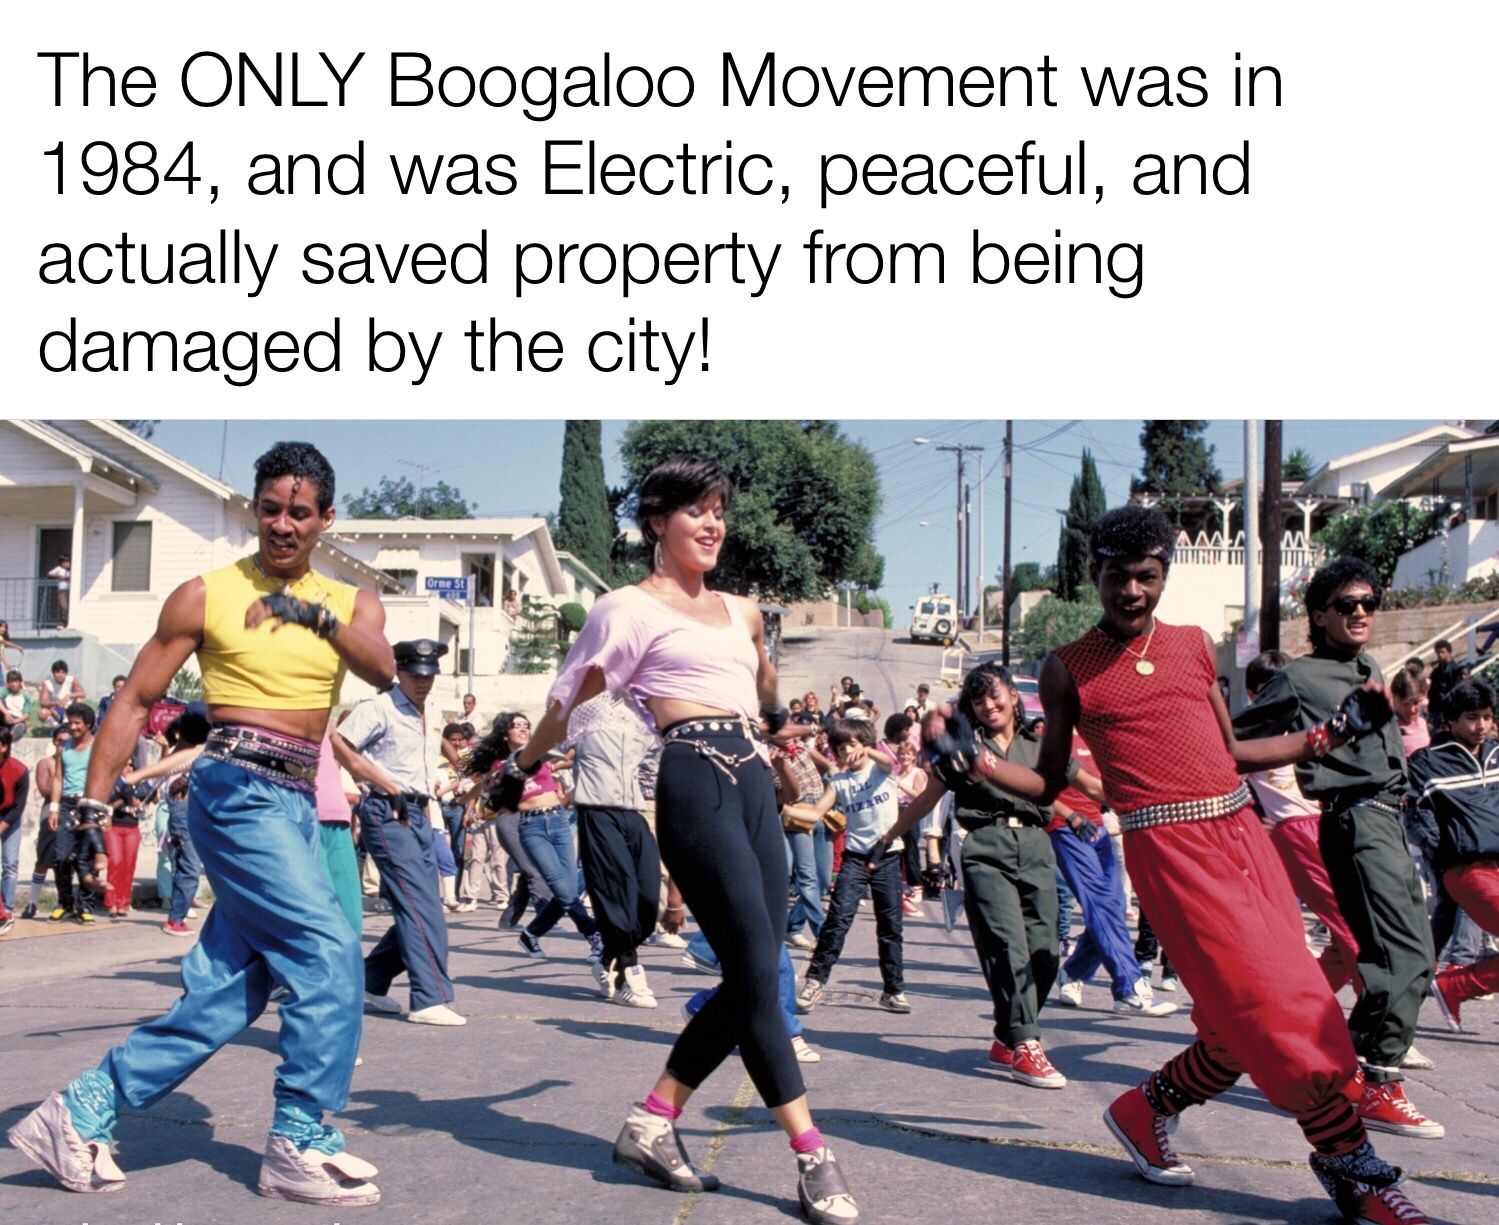 breakin 2 electric boogaloo - The Only Boogaloo Movement was in 1984, and was Electric, peaceful, and actually saved property from being damaged by the city!